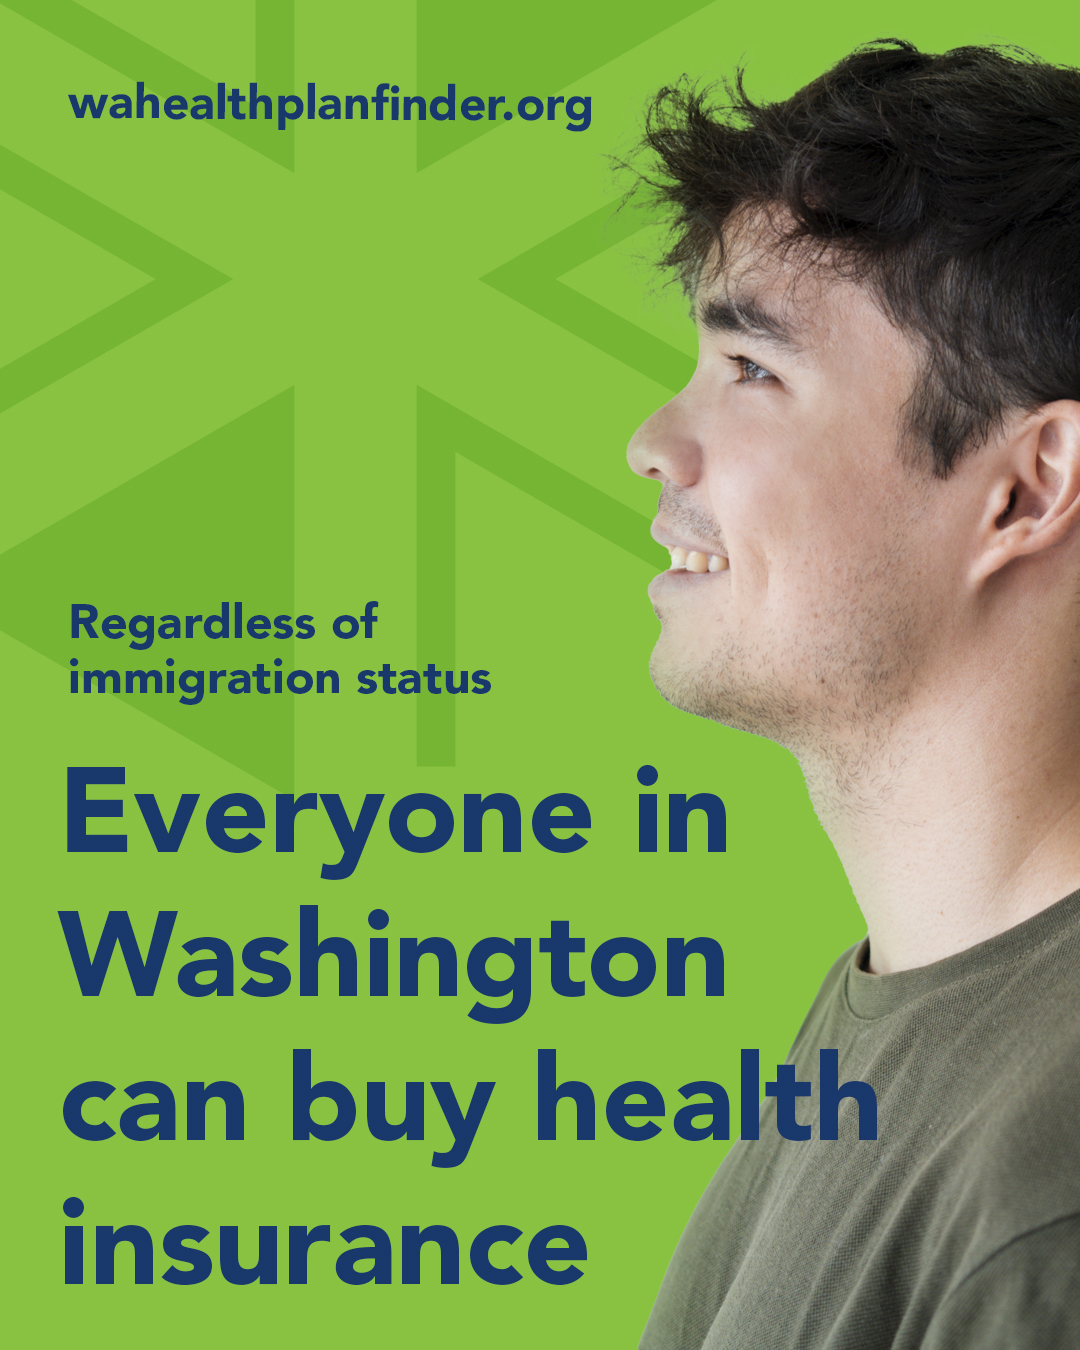 Wahealthplanfinder.org. Regardless of immigration status. Everyone in Washington can buy health insurance.